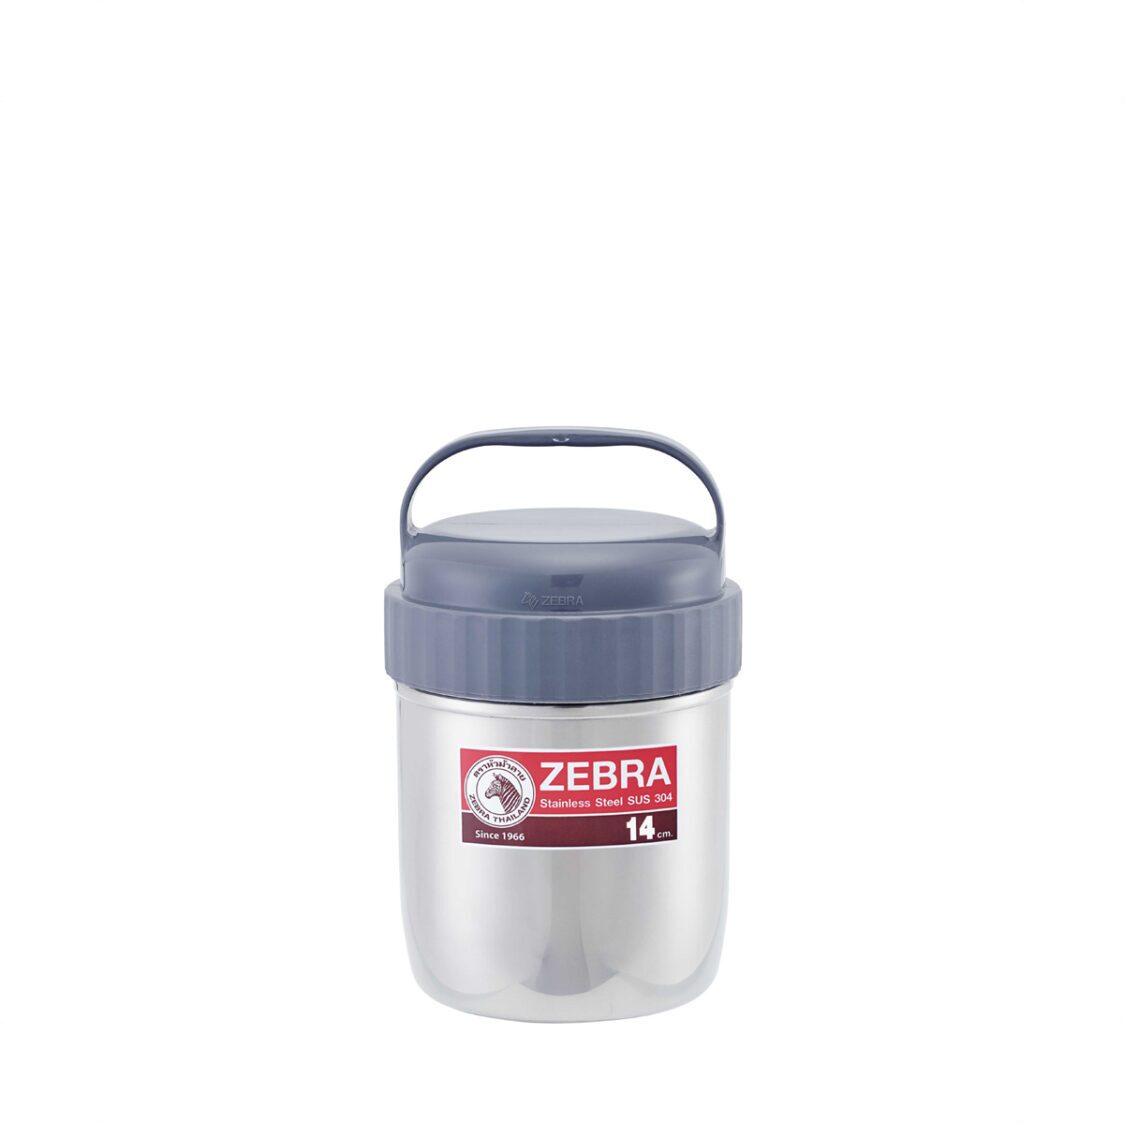 Zebra Double Wall Container with PLC Lid 14cm Grey